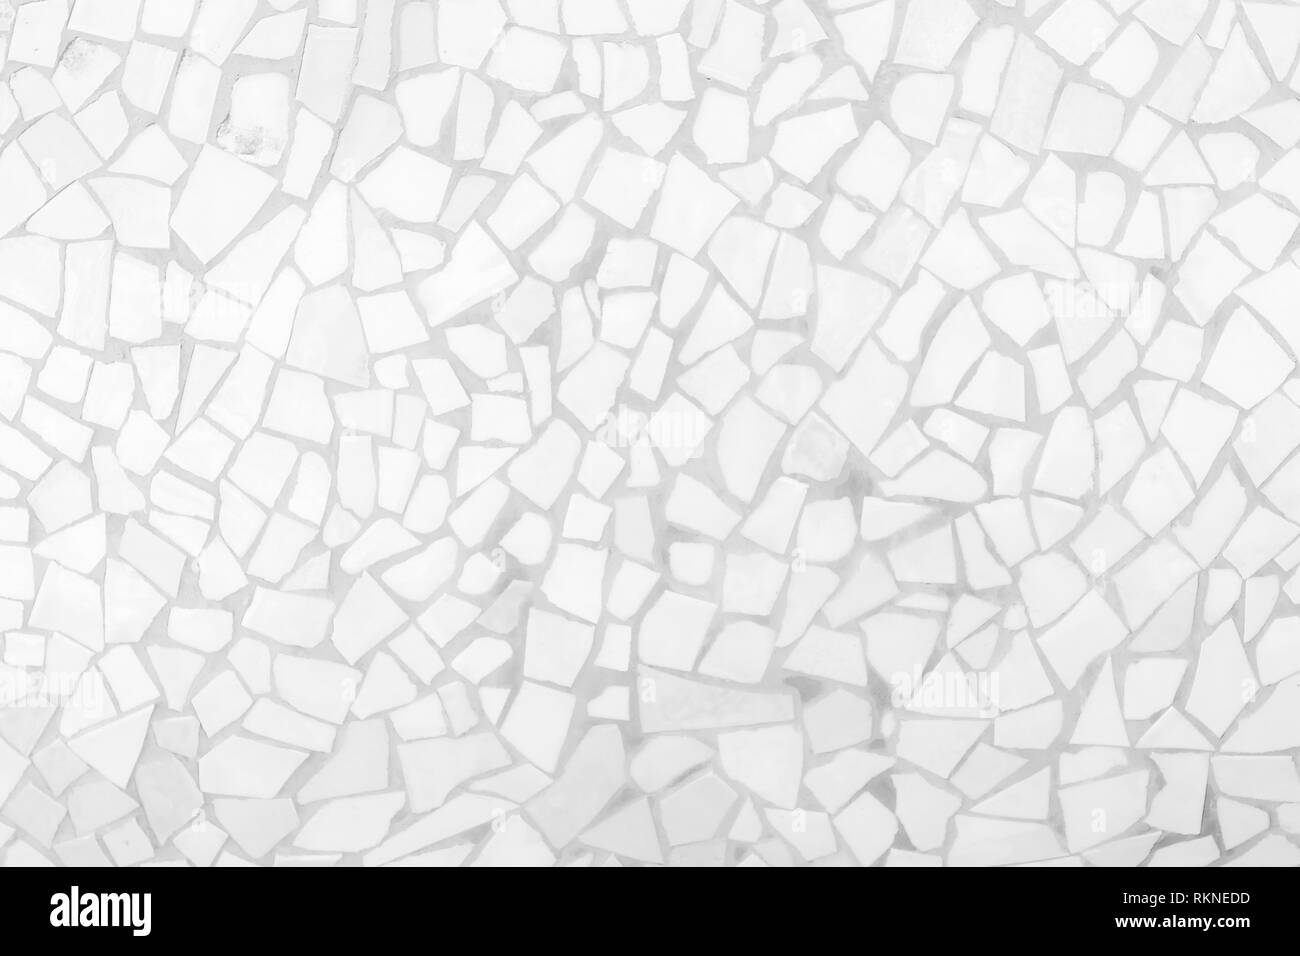 Broken tiles mosaic seamless pattern. White and Grey the tile wall high resolution real photo or brick seamless and texture interior background. Stock Photo